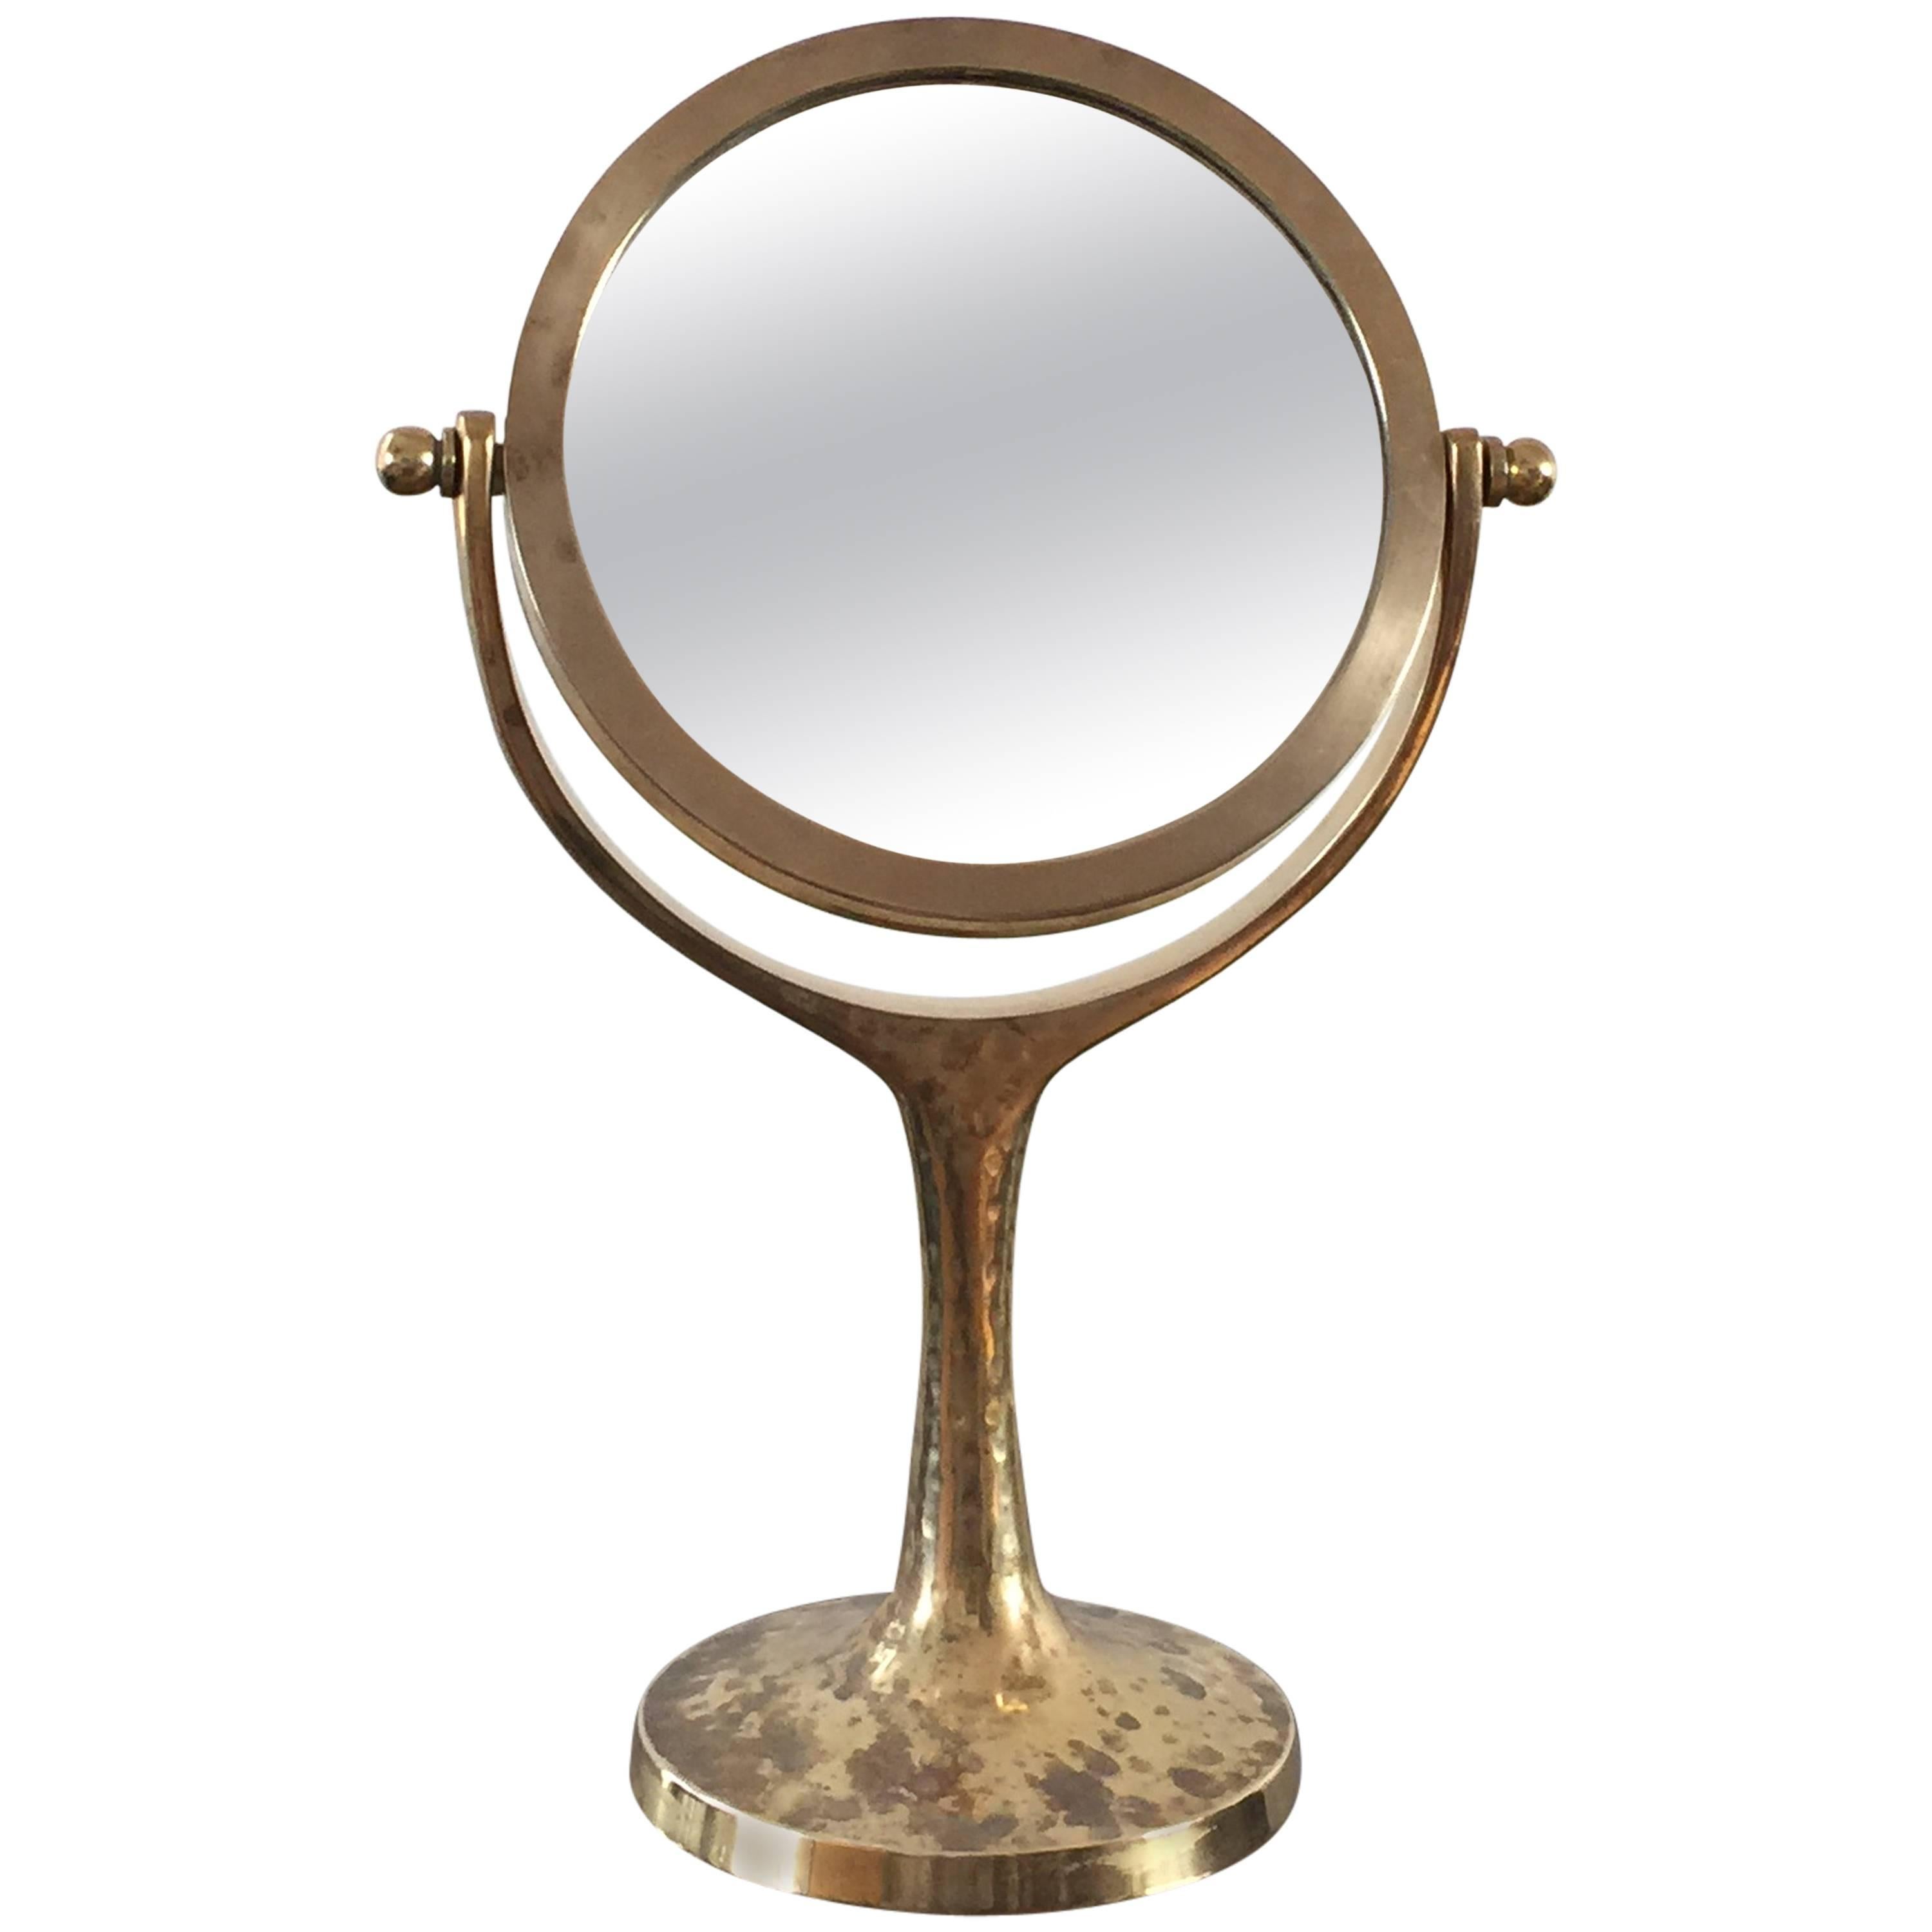 Exceptional Petite Vanity "psyché" Mirror in Brass, France, 1960s